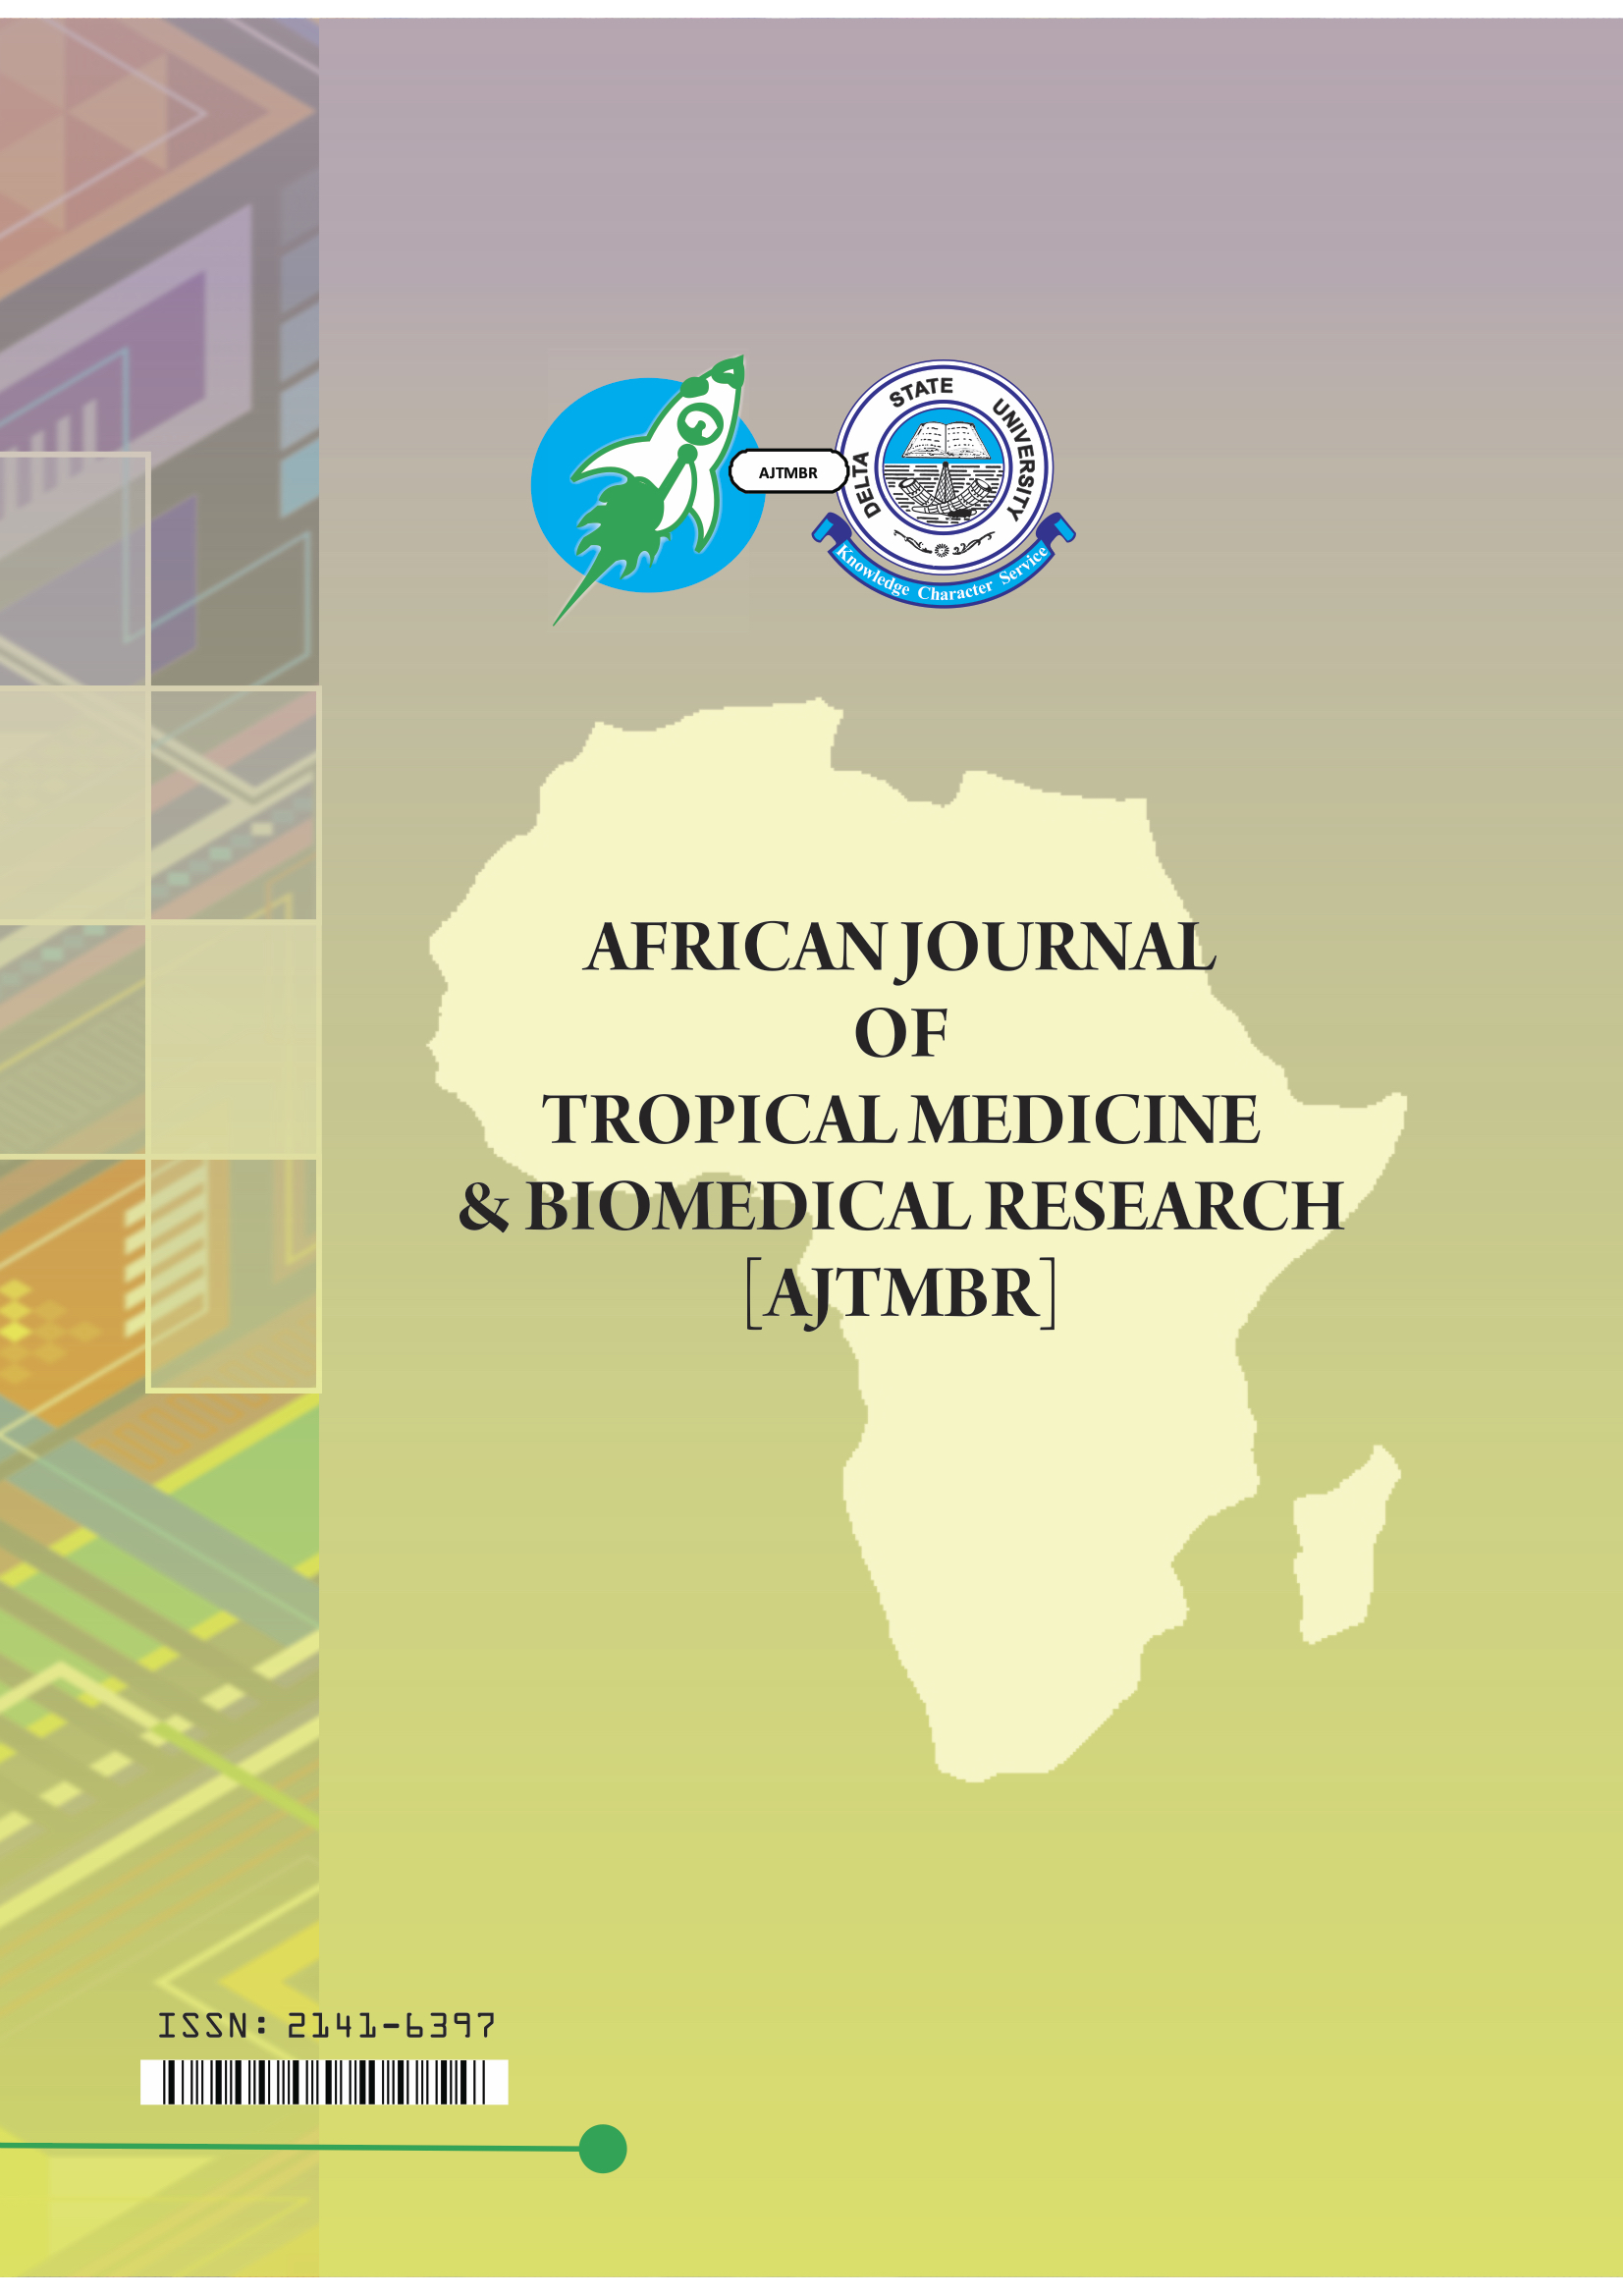 African Journal of Tropical Medicine and Biomedical Research